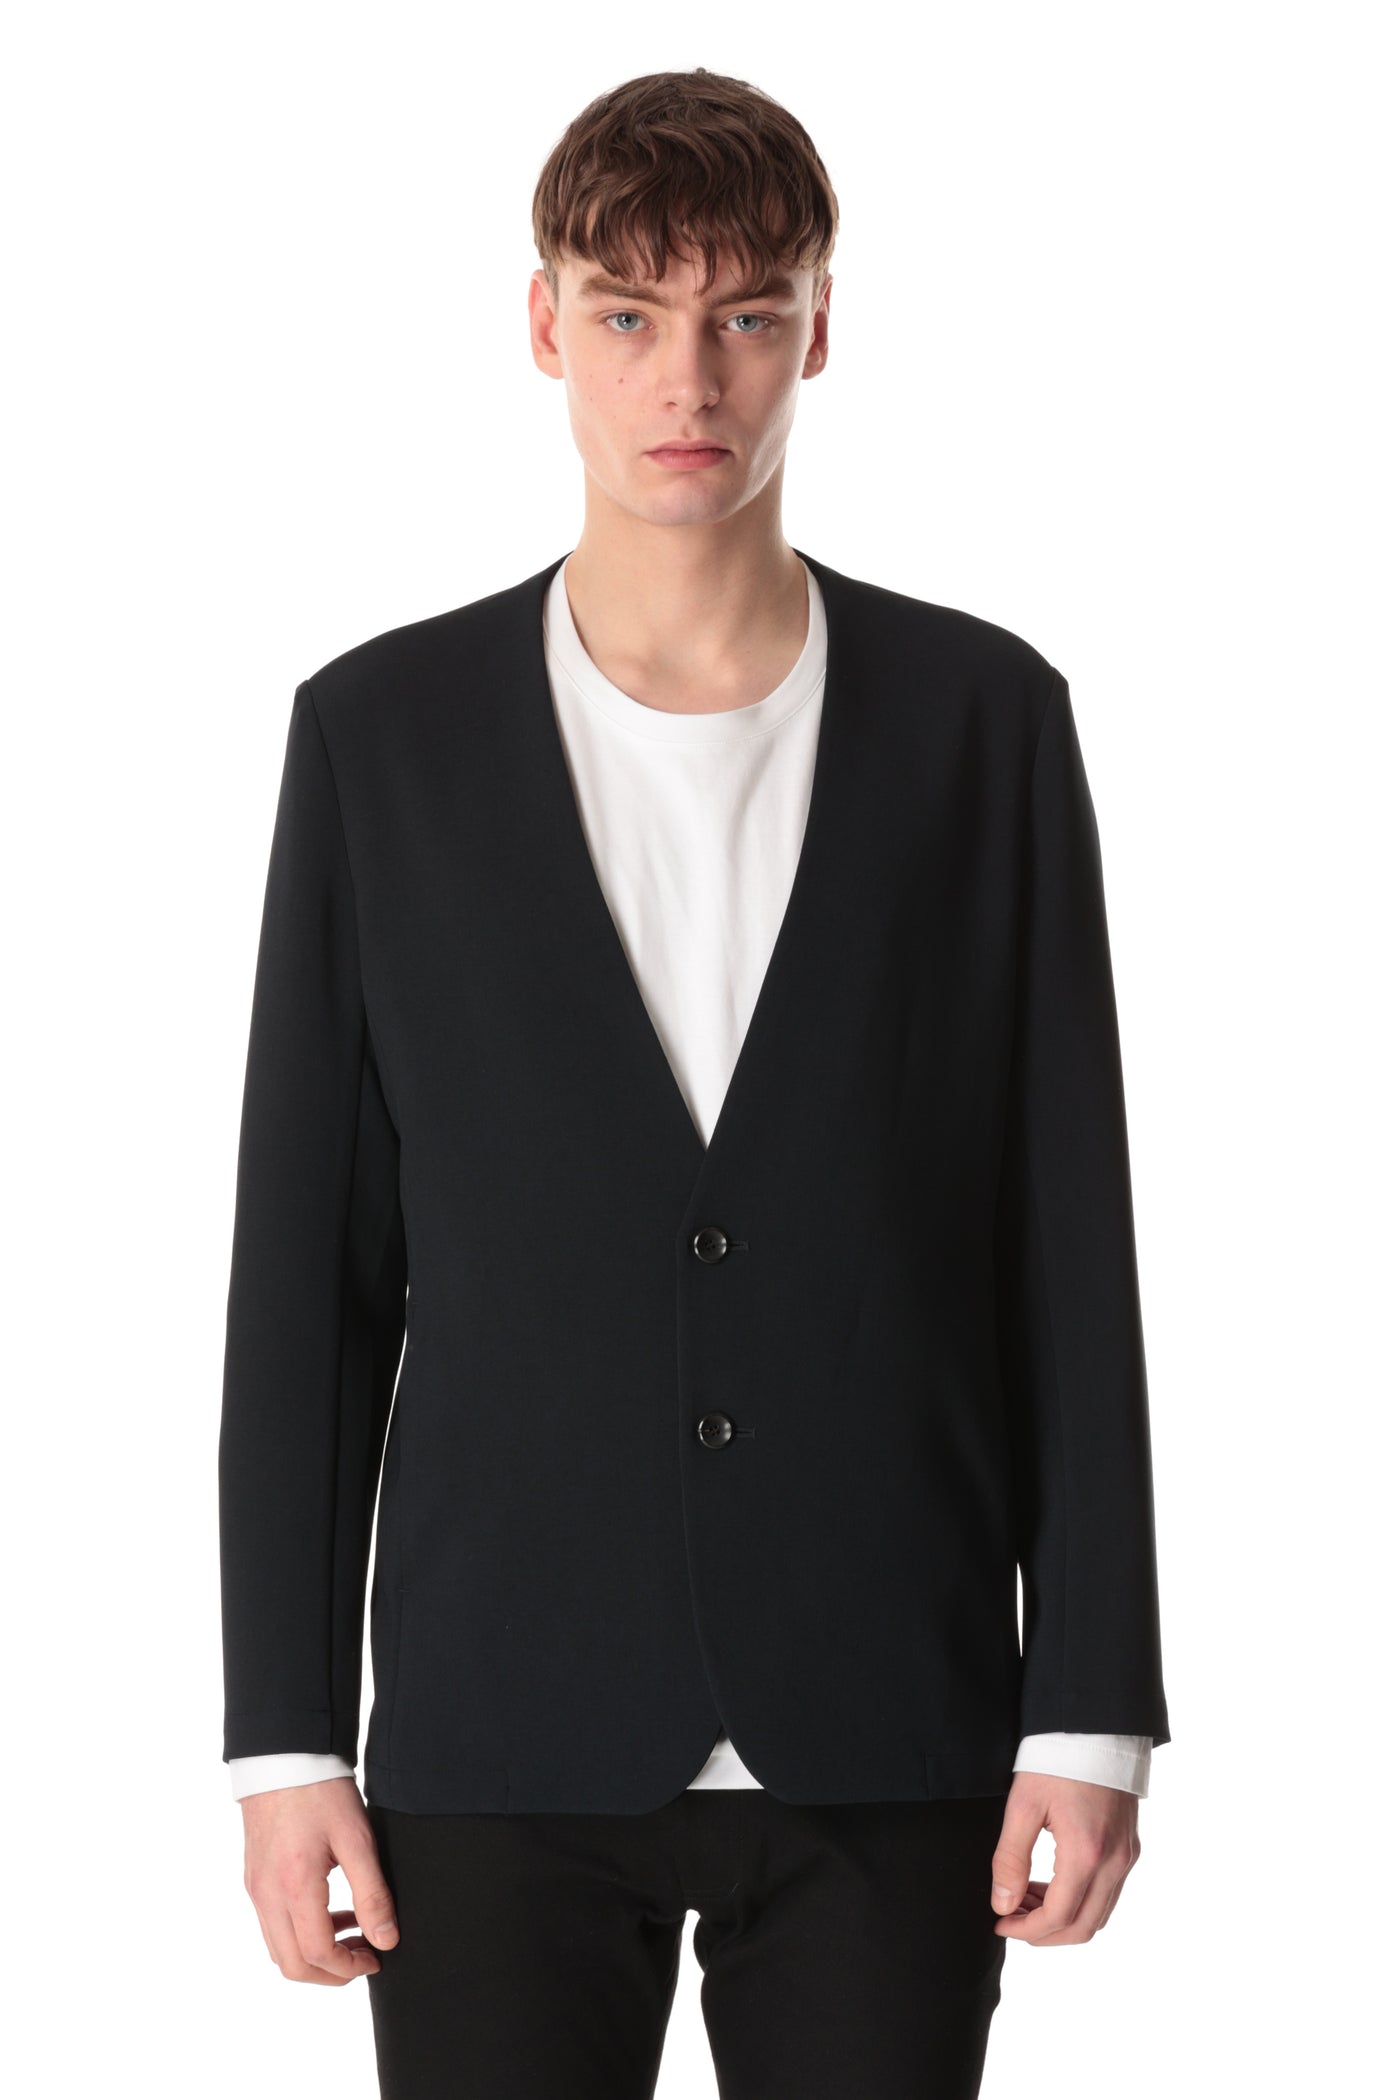 AG32-062 Polyester stretch double cross collarless jacket